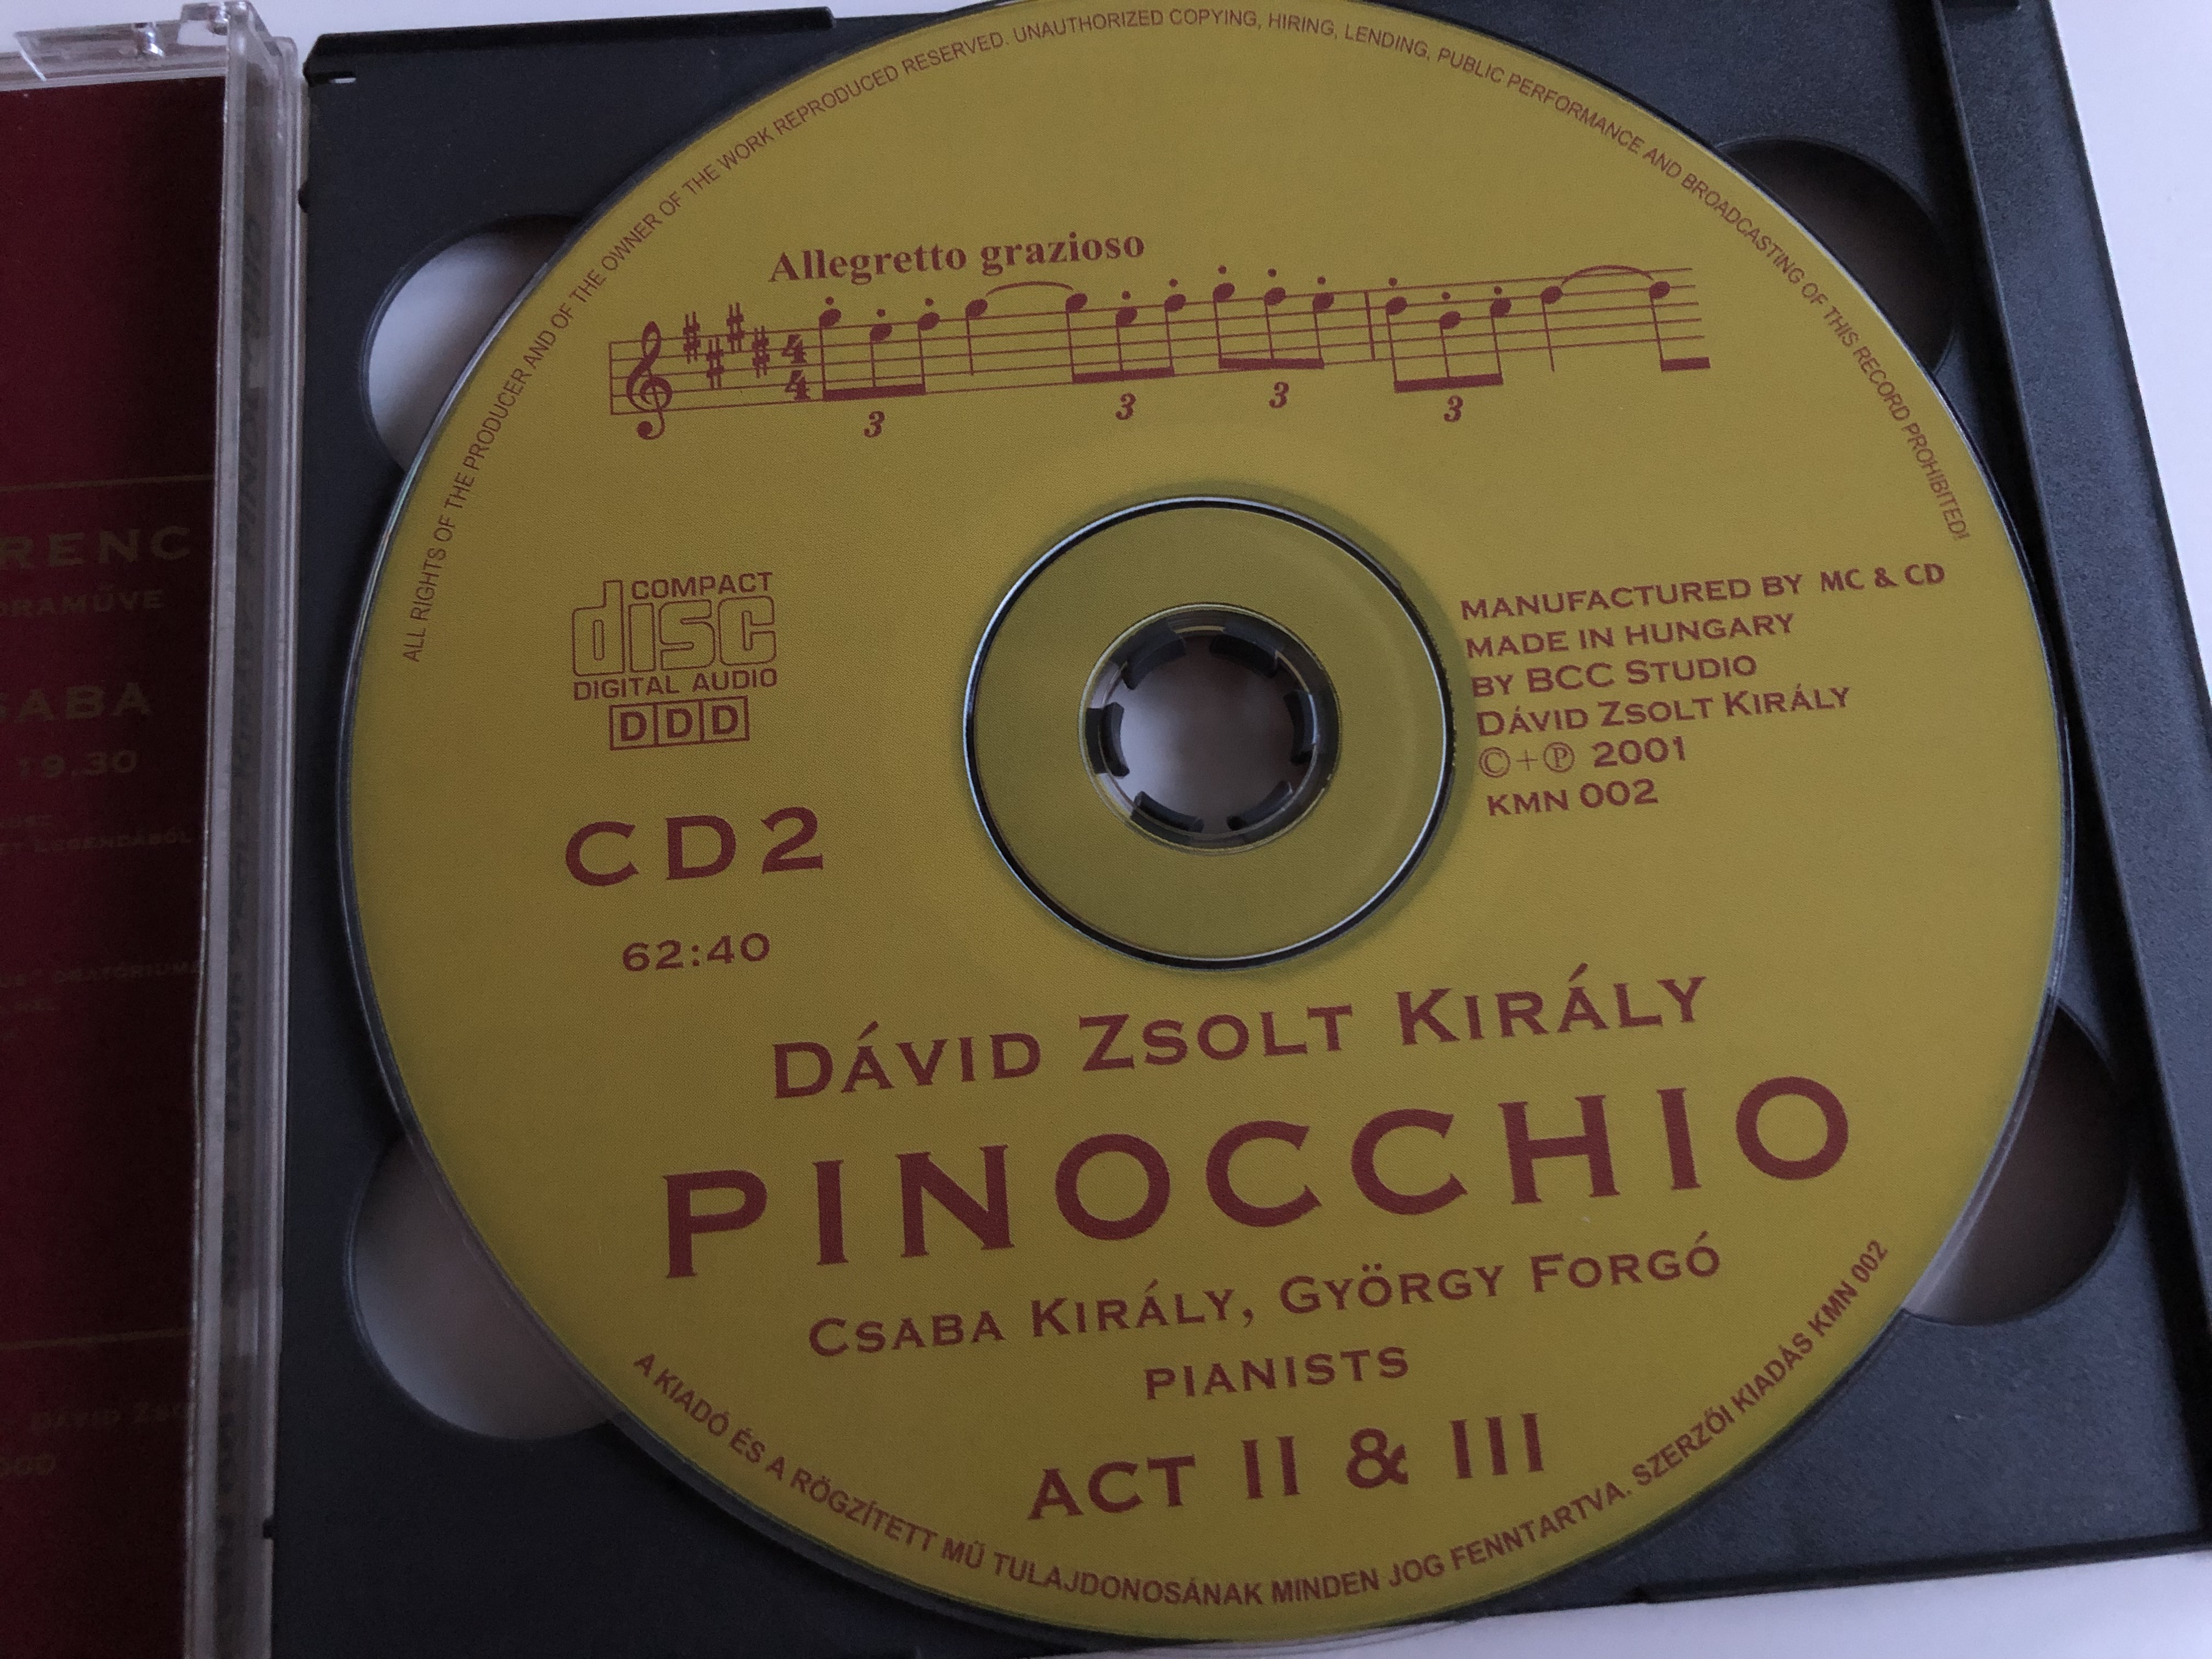 david-zsolt-kiraly-pinocchio-ballet-symphony-in-3-acts-csaba-kiraly-gyorgy-forgo-pianists-live-recording-of-the-world-premiere-kiraly-music-network-2x-audio-cd-2001-kmn-001-002-16-.jpg